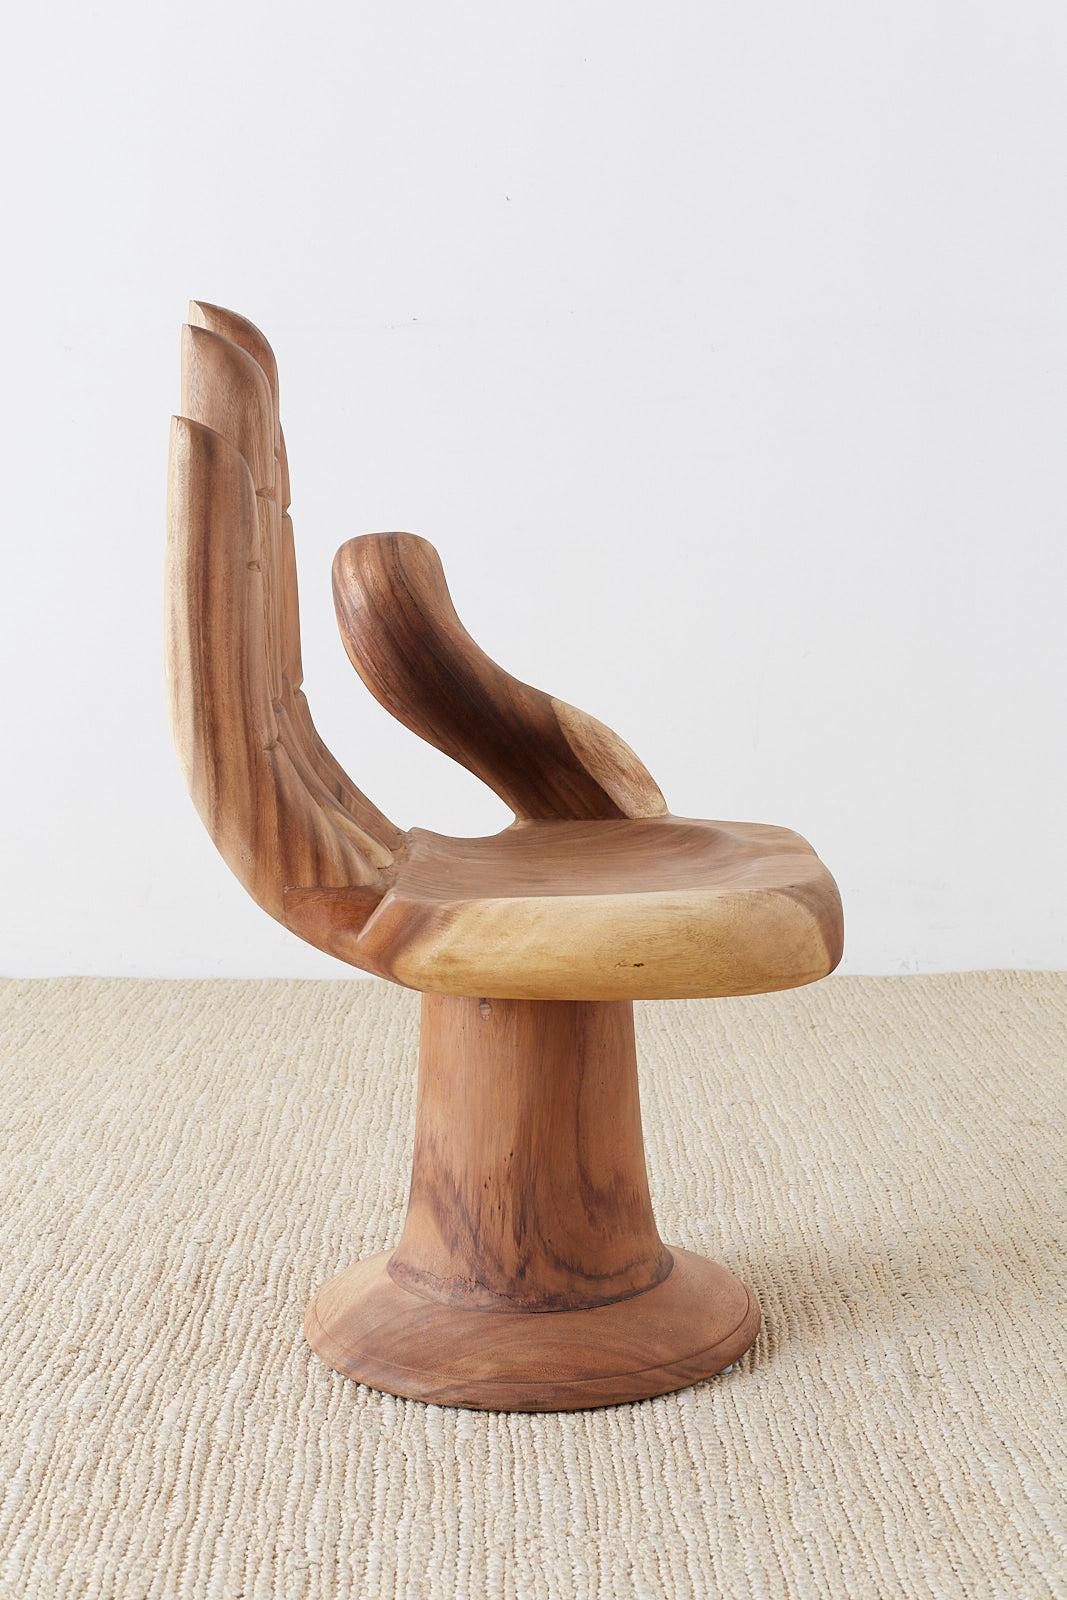 Carved Hardwood Hand Chair after Pedro Friedeburg 1